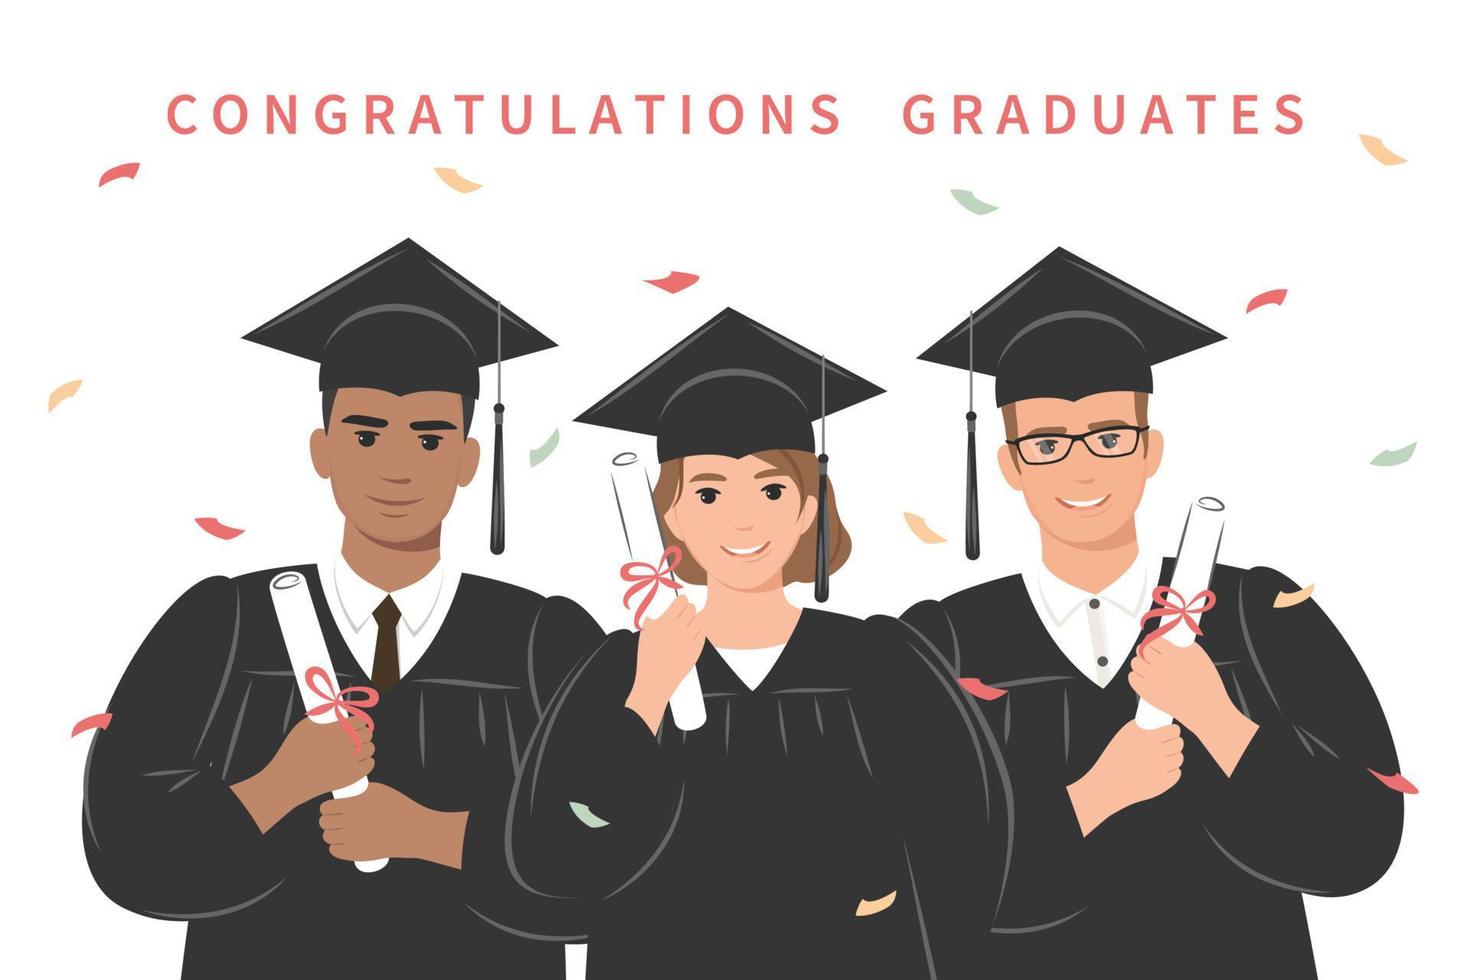 Congratulations graduates. Group of happy students-graduates university or college wearing an academic gown, graduation cap and holding a diploma. Vector illustration